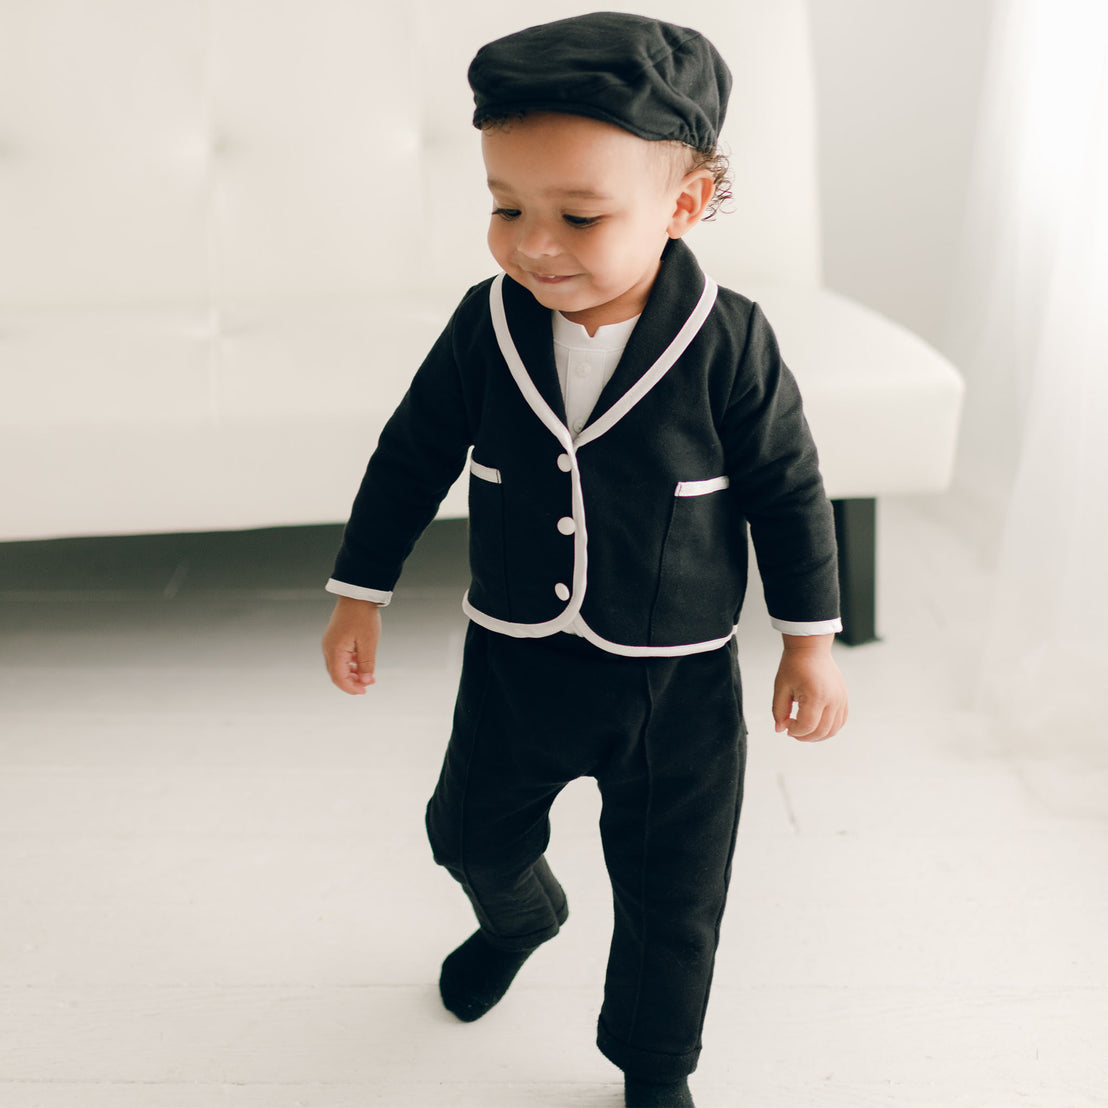 Baby boy's clothing spring and autumn gentleman's birthday suit newborn  party dress soft cotton vest + shirt + pants baby 4-piec